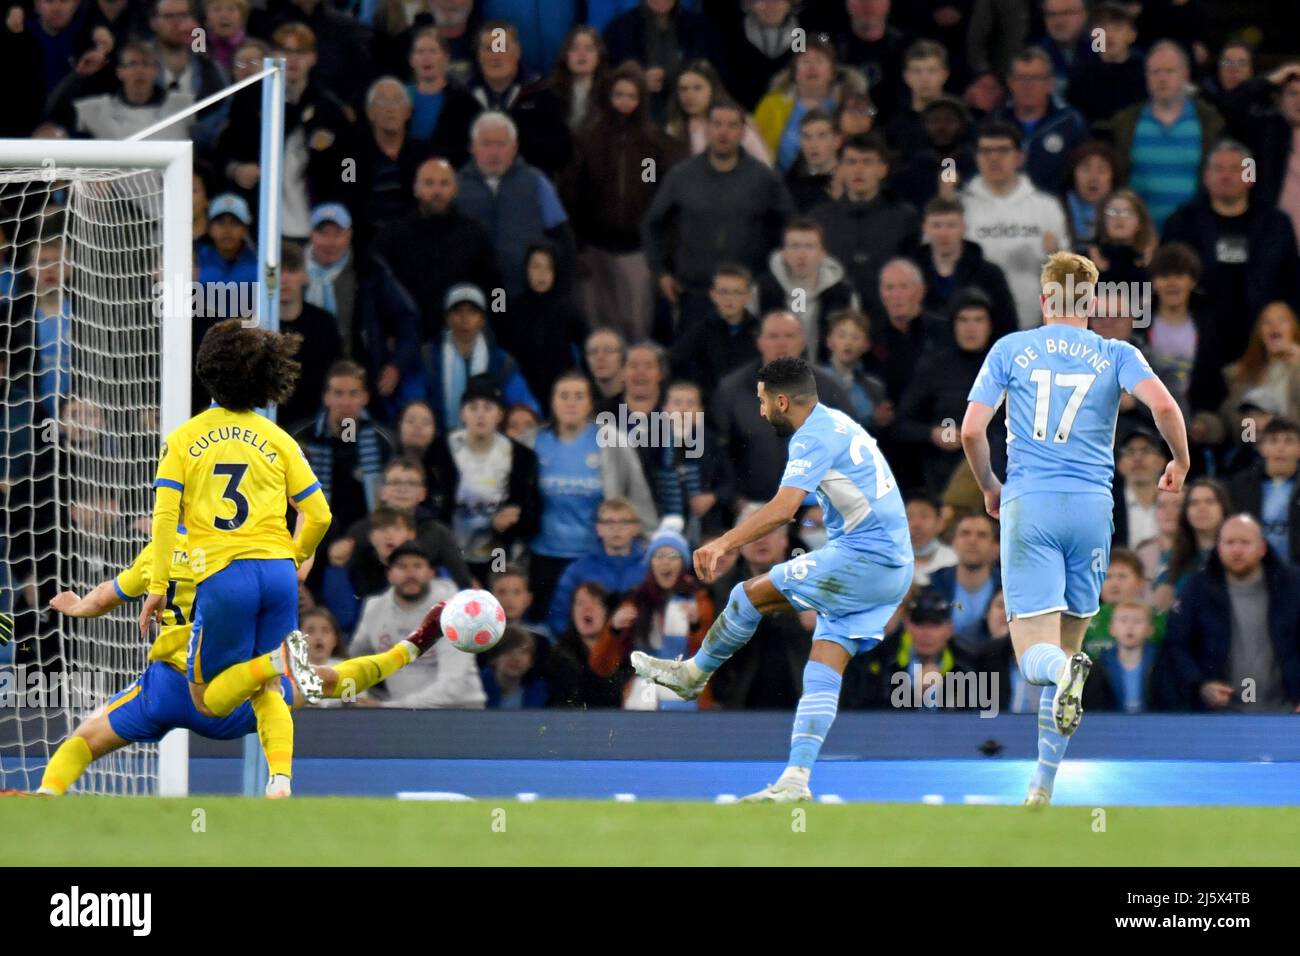 Manchester City's Riyad Mahrez scores his side's first goal of the game. Picture date: Thursday April 21, 2022. Photo credit should read:   Anthony Devlin/Alamy Live News/Alamy Live News Stock Photo